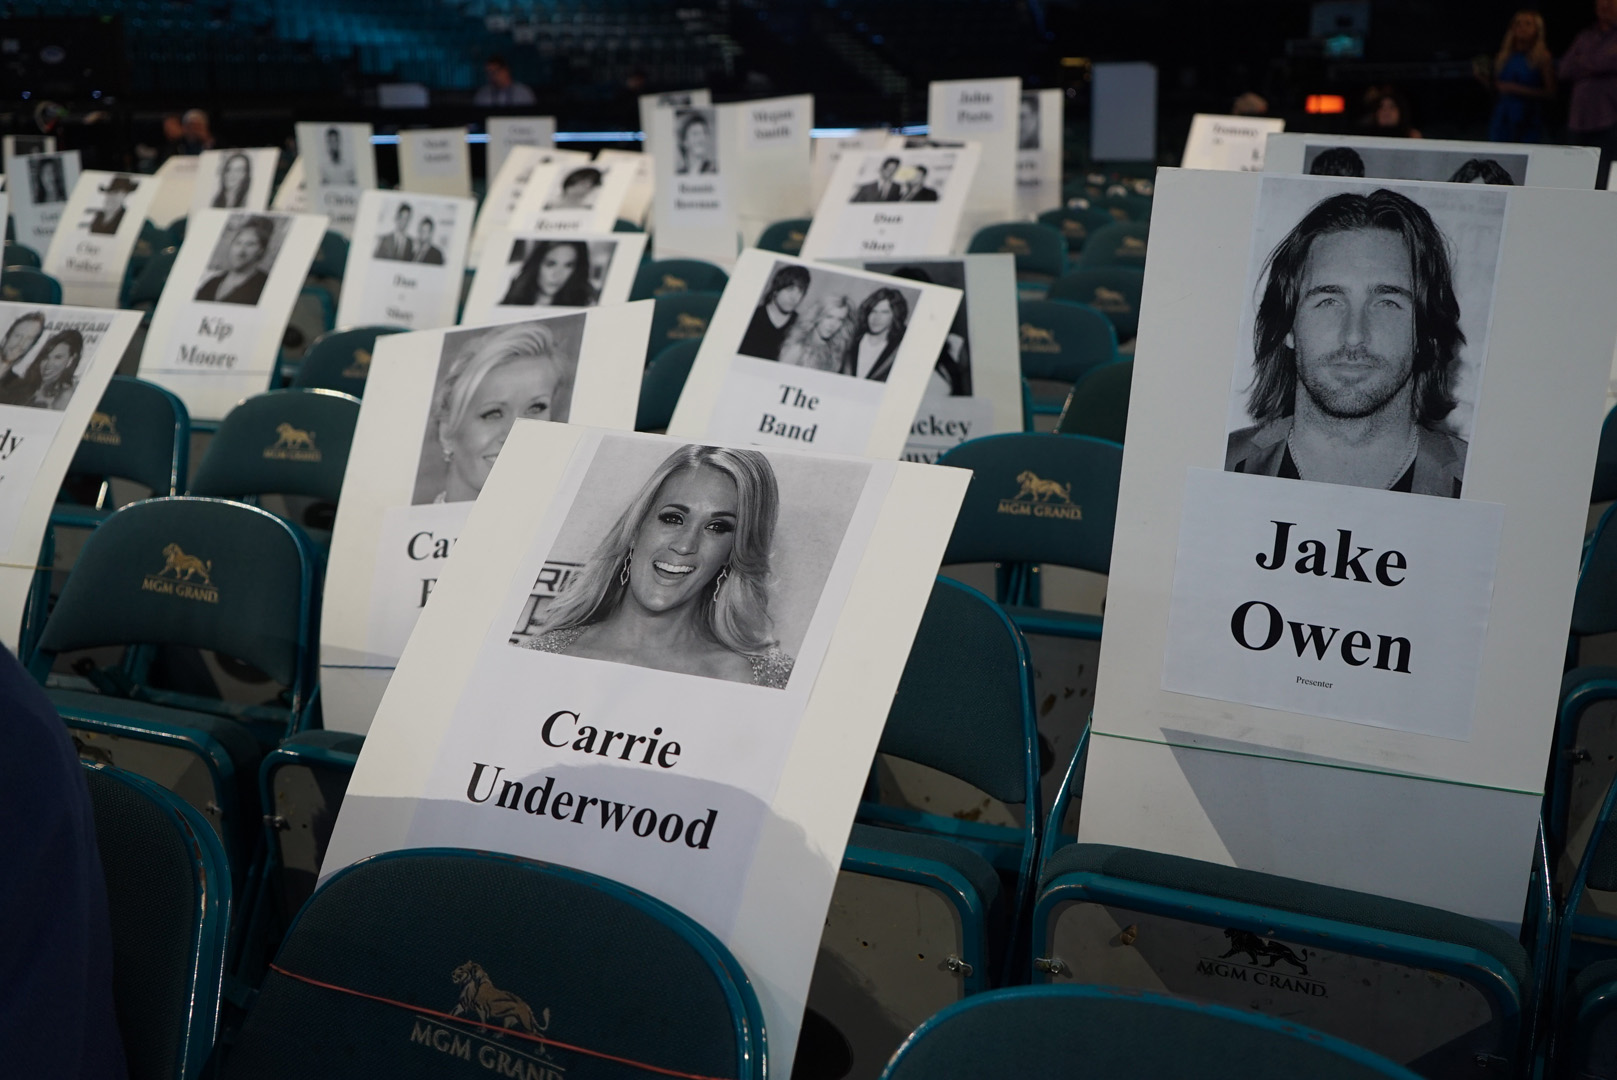 Carrie Underwood and Jake Owen are bound to bump into each other.